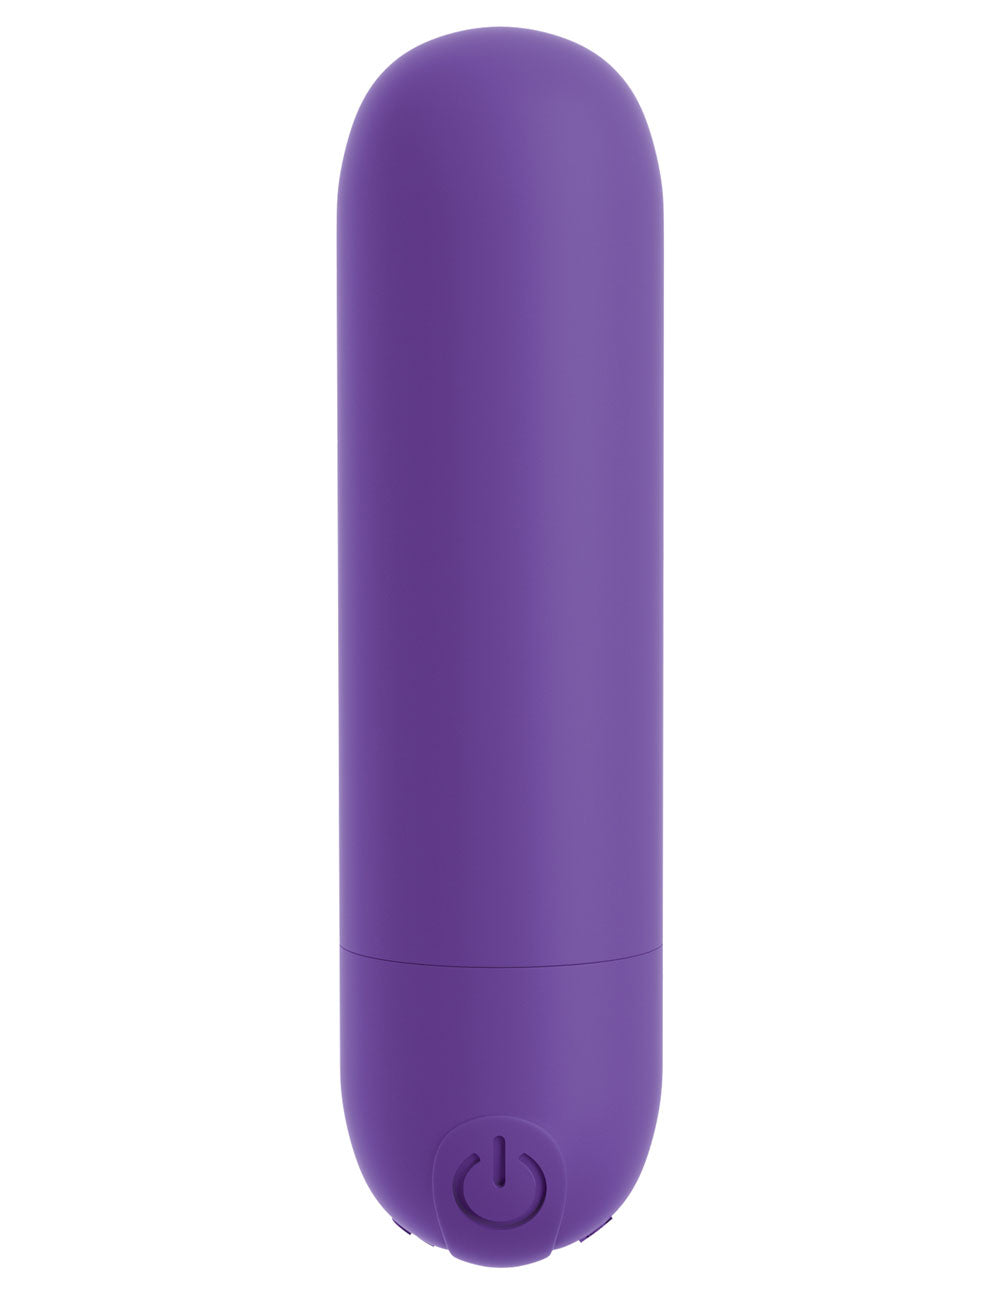 Omg! Bullets Play Rechargeable Vibrating Bullet - Purple PD1793-12